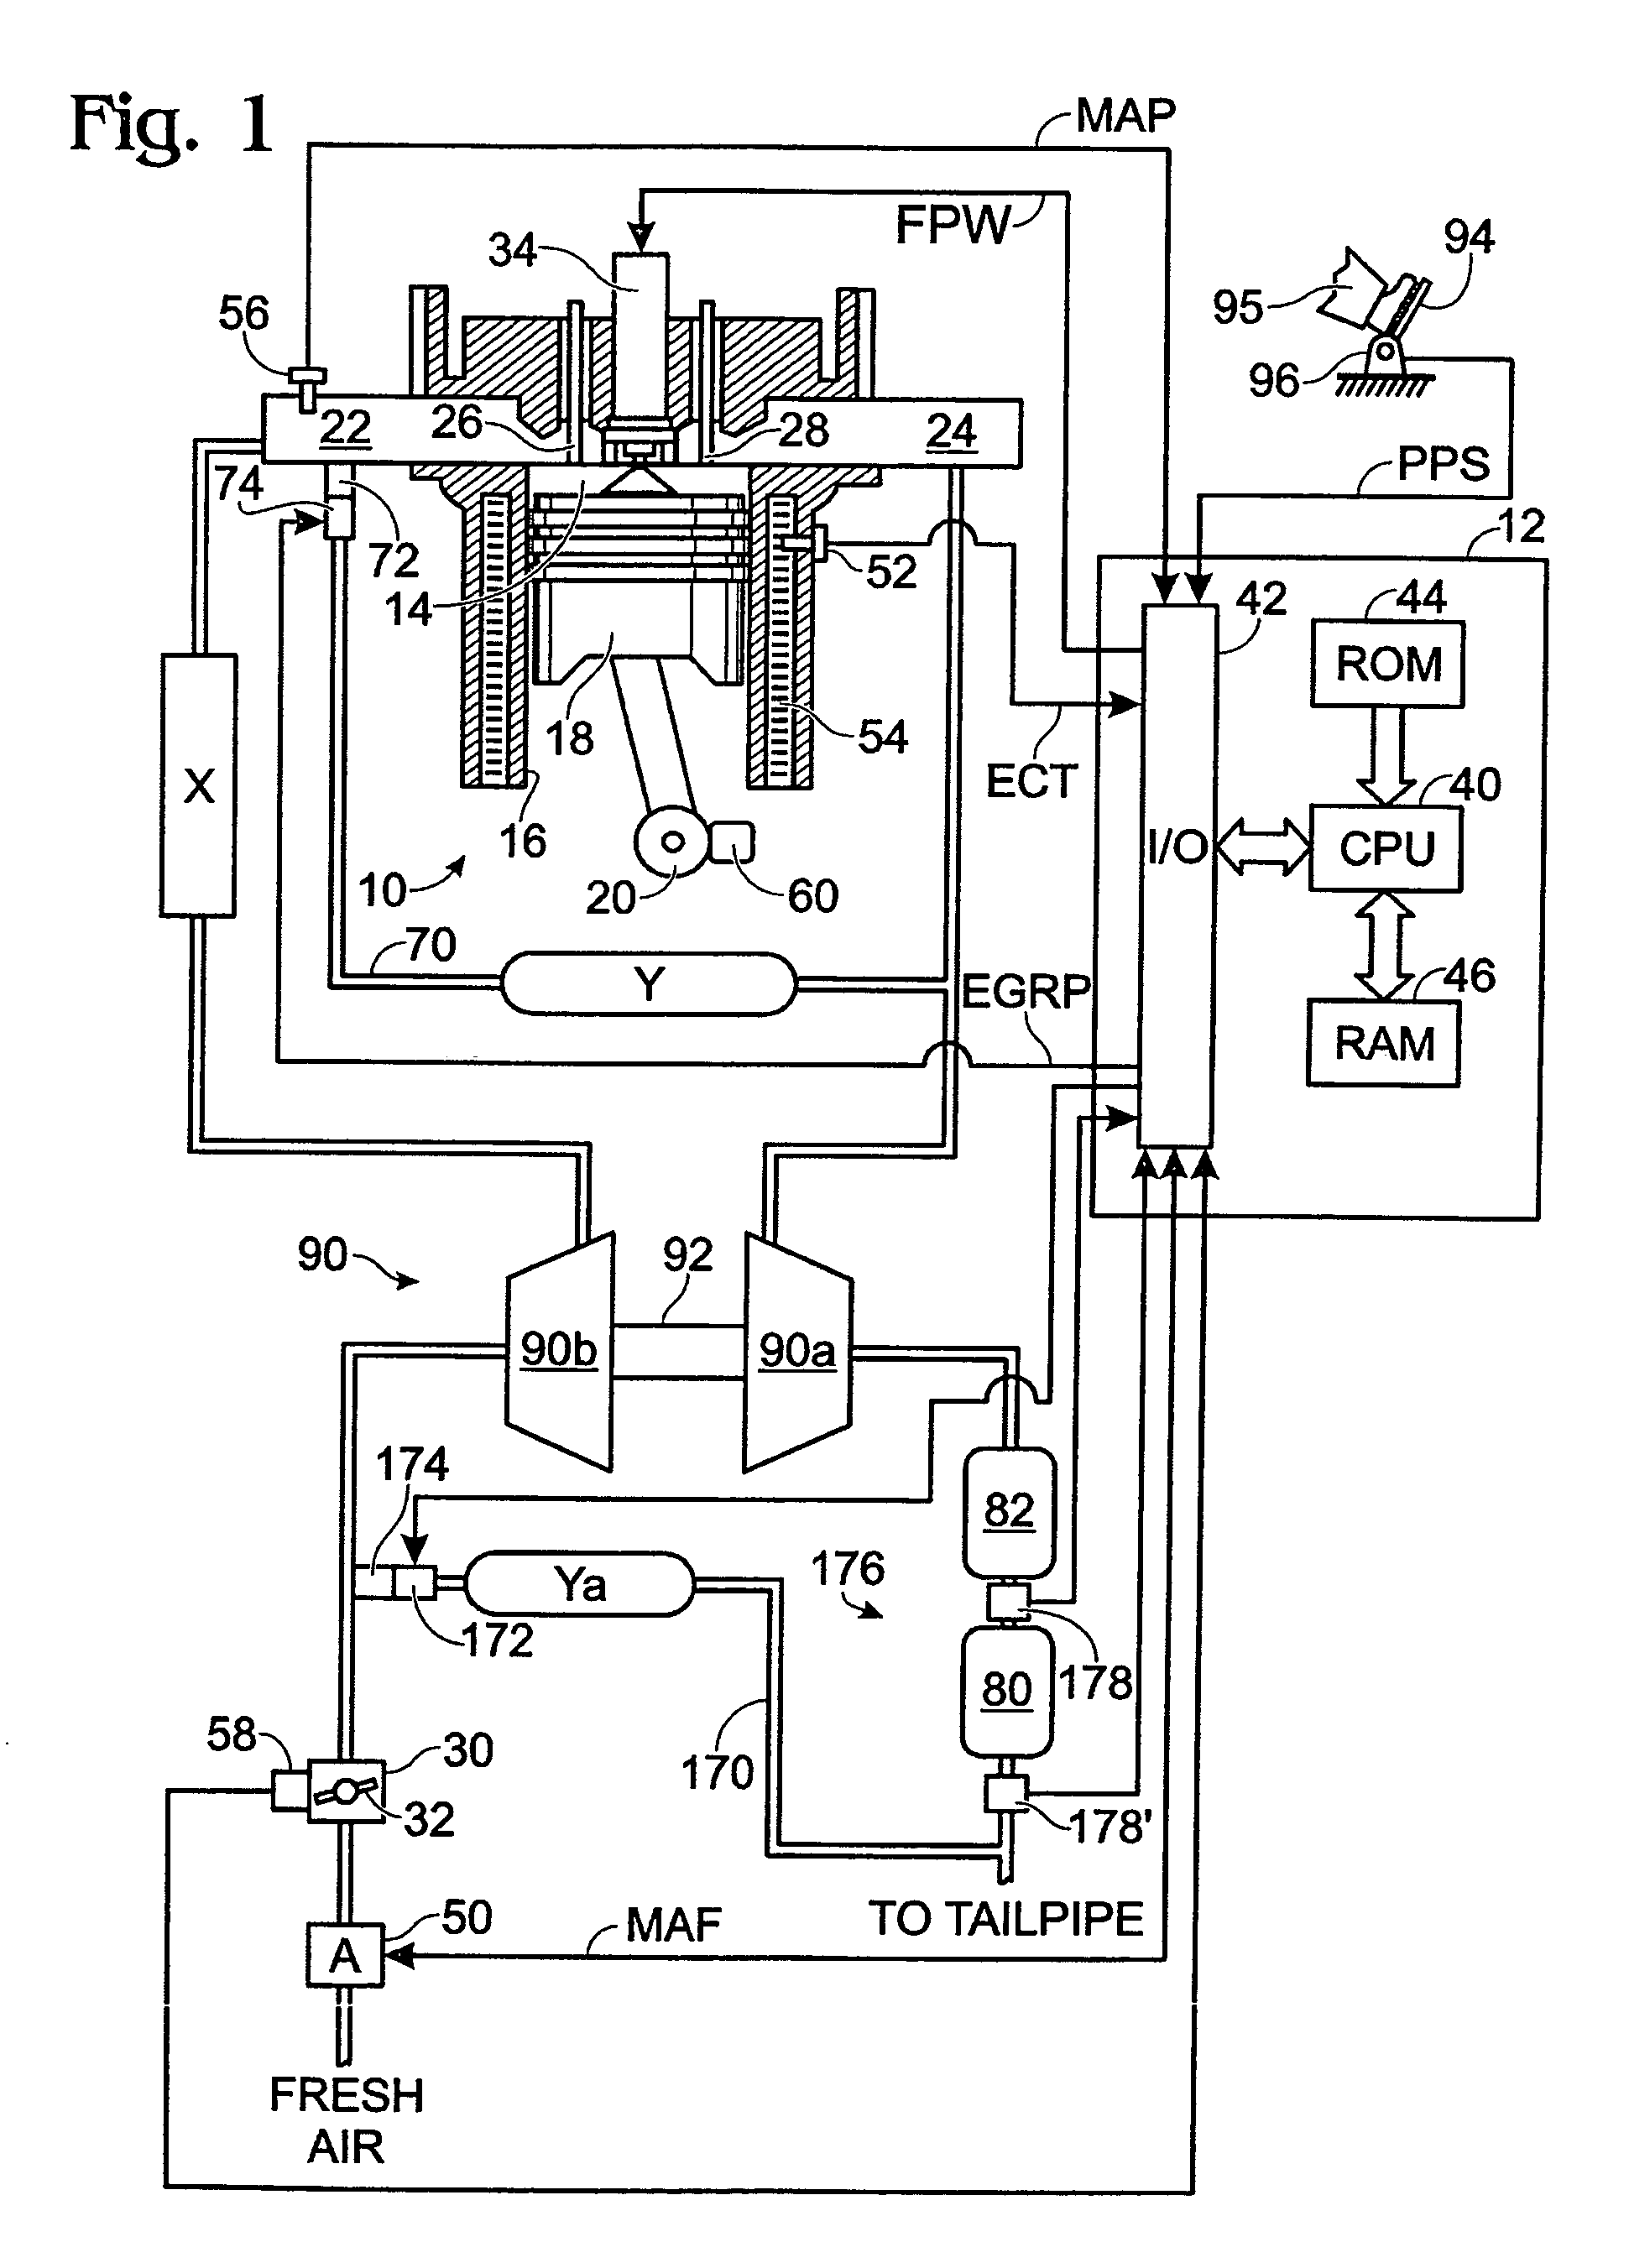 System and method for operating an engine having an exhaust gas recirculation system